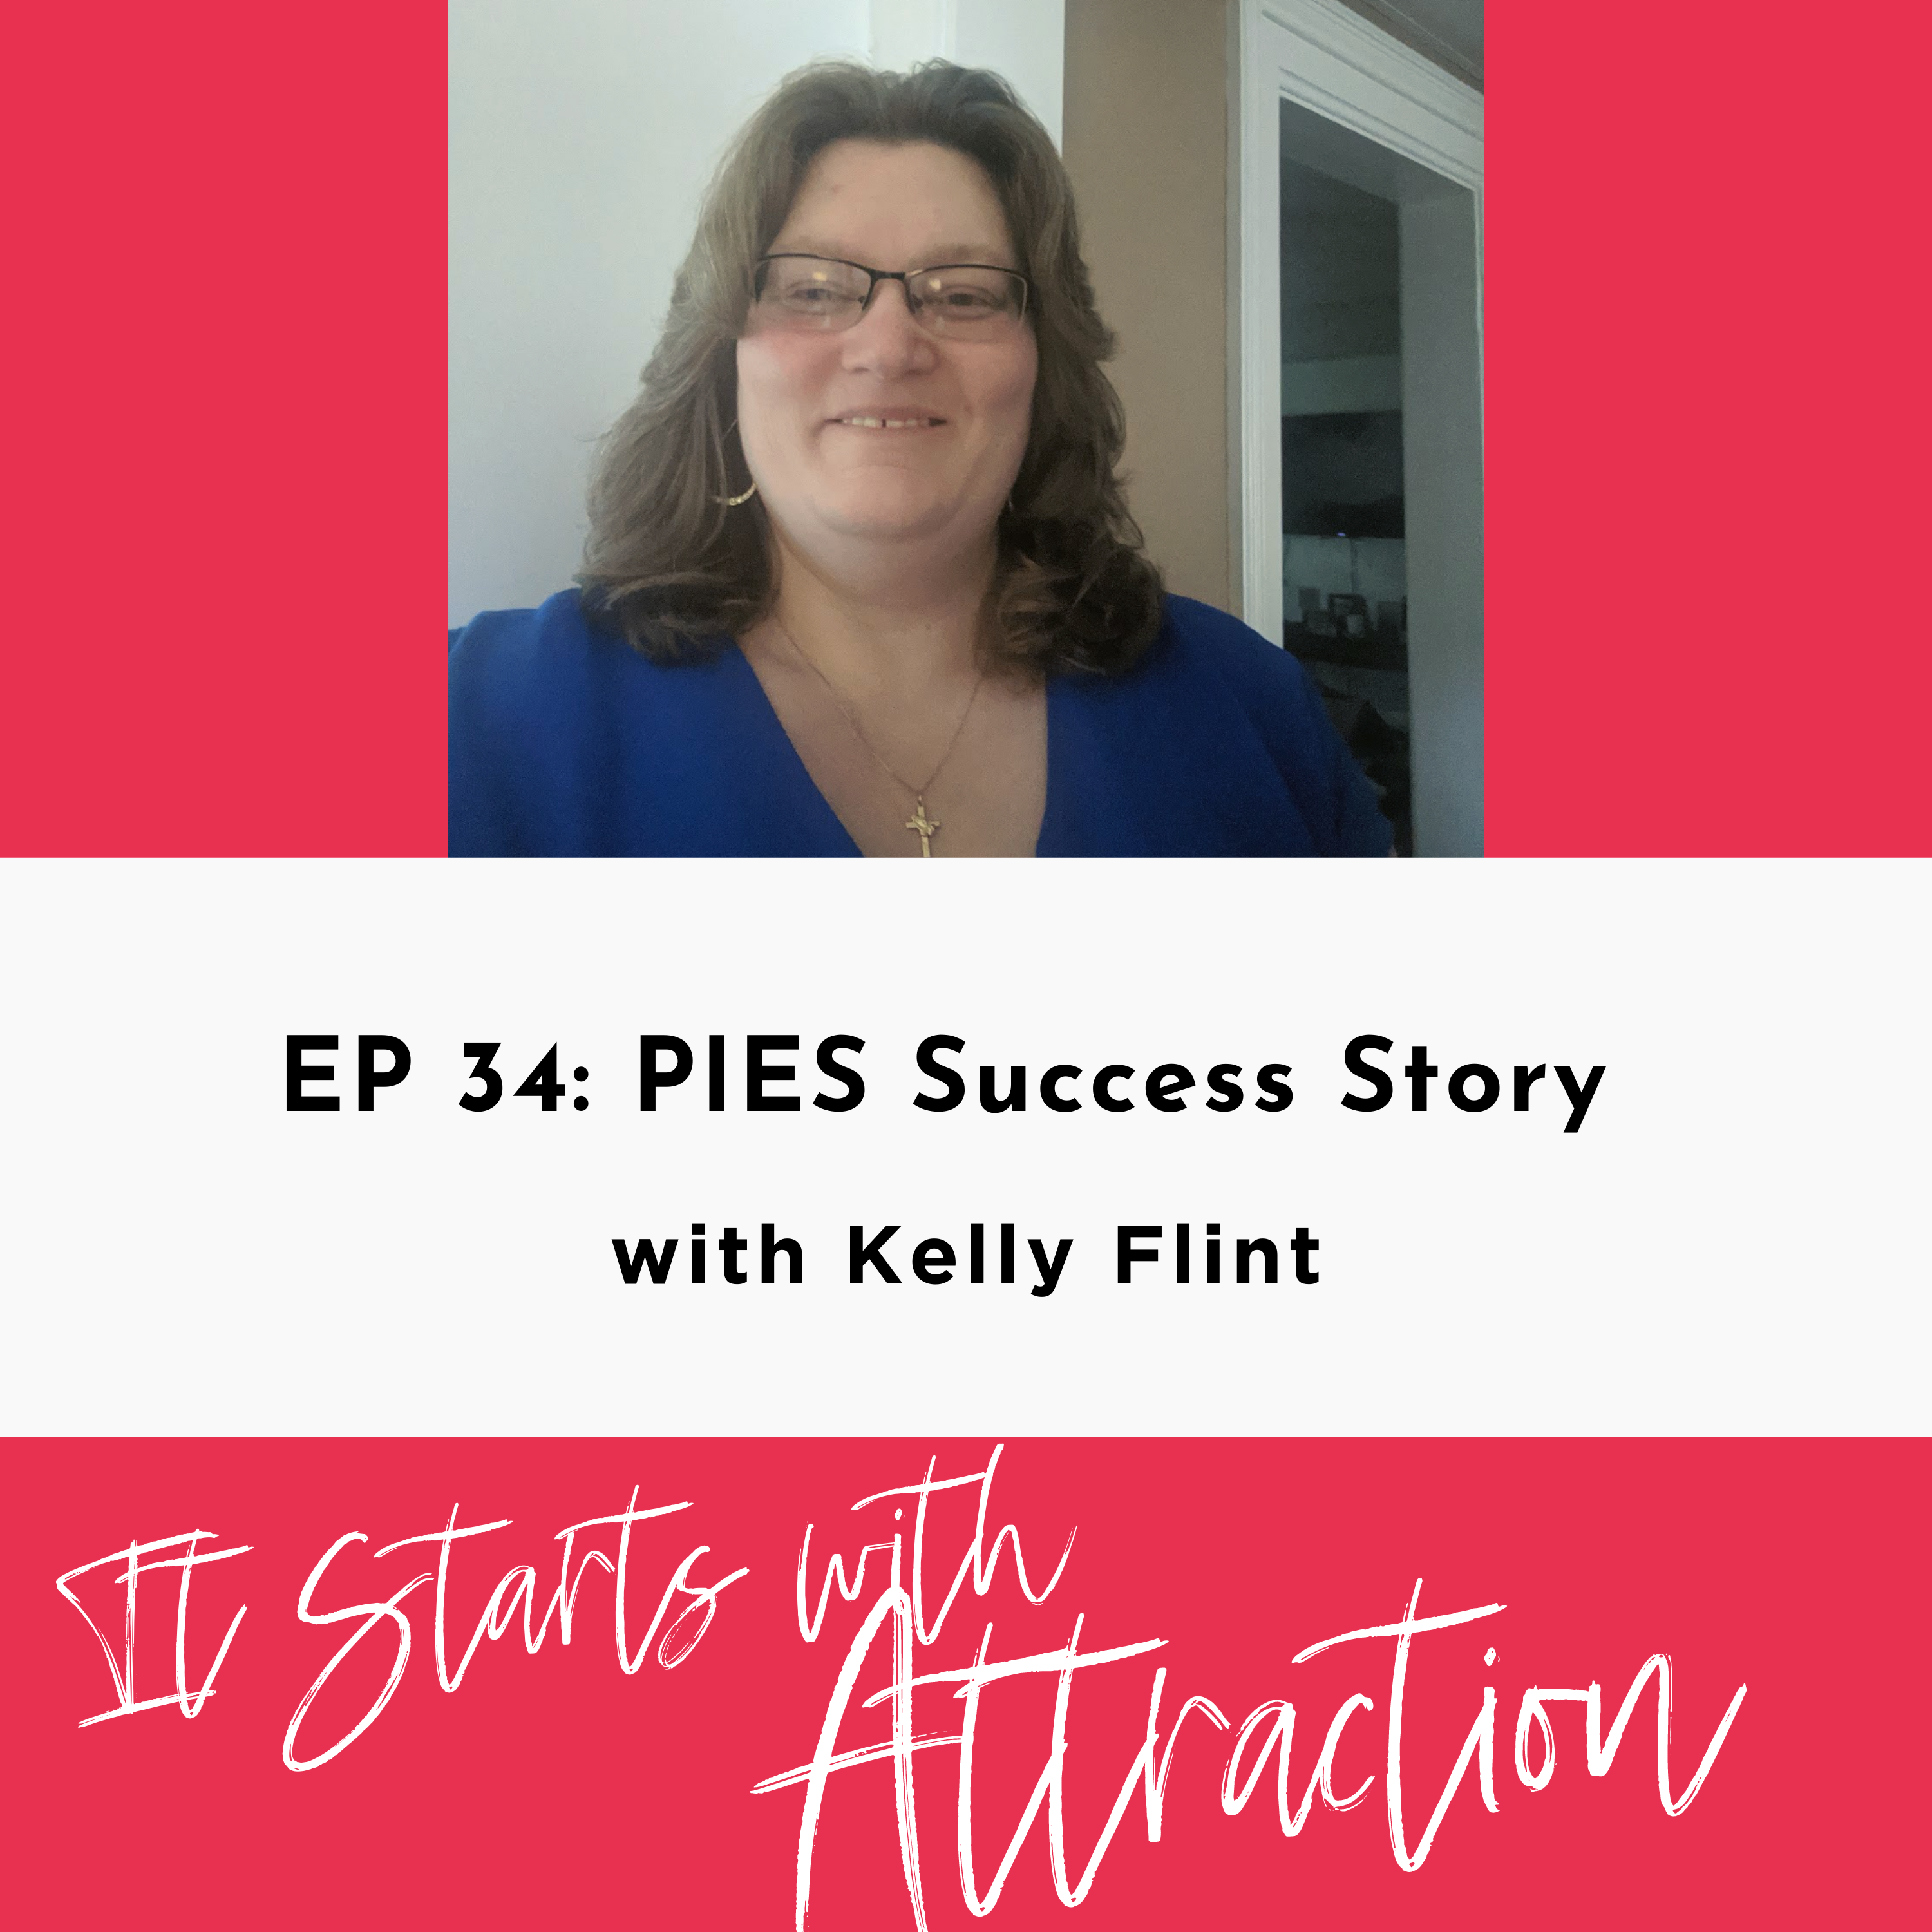 EP 34: Success story with Kelly Flint